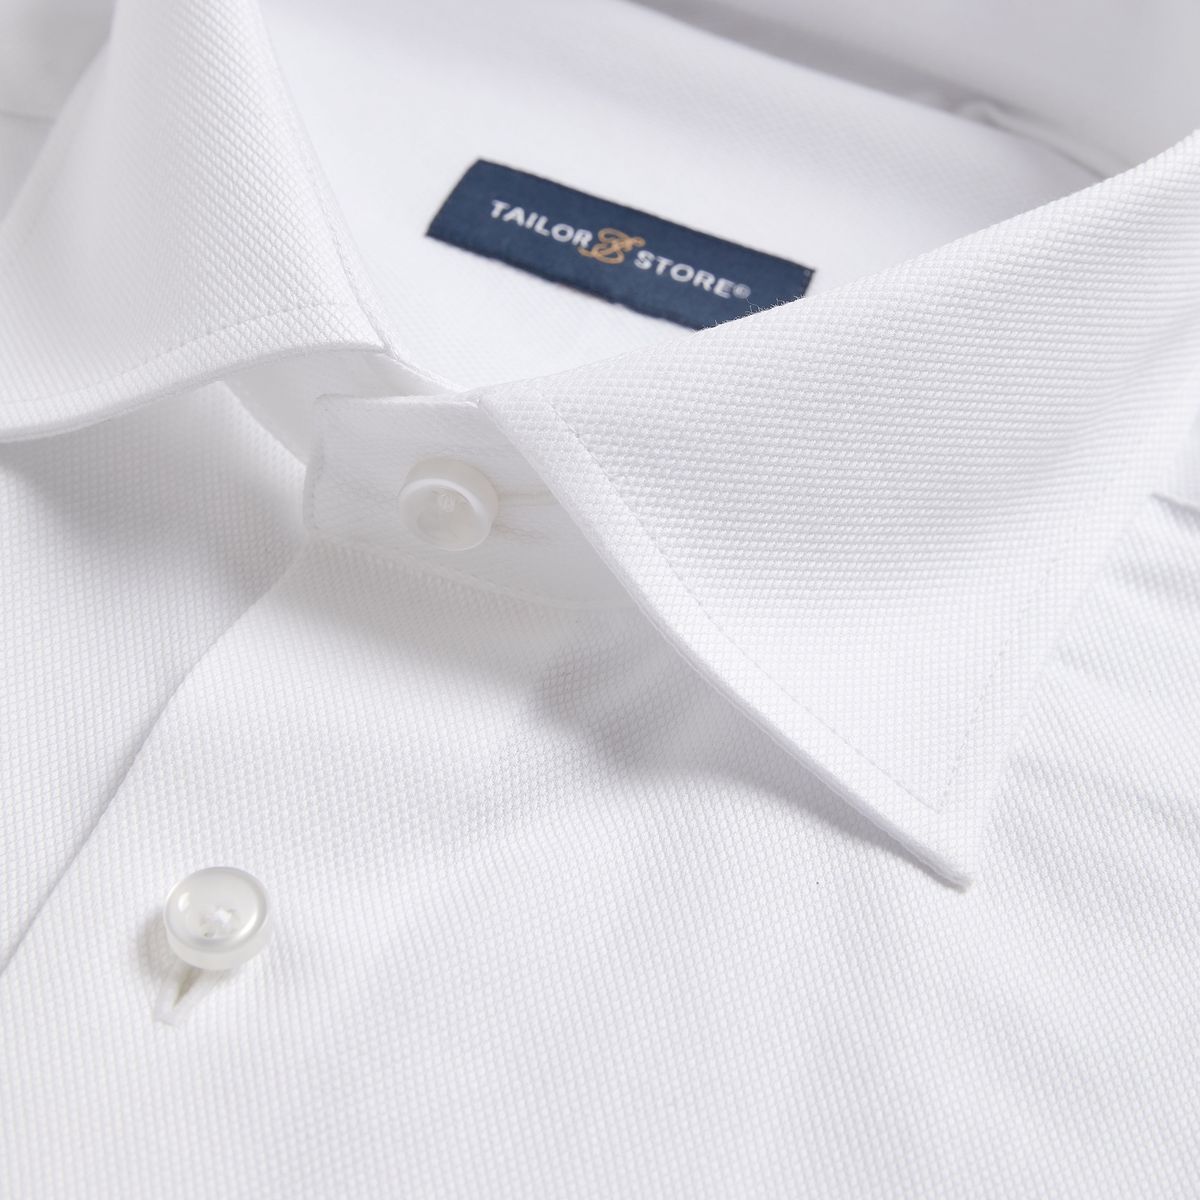 Classic white business shirt in dobby twill | Tailor Store®